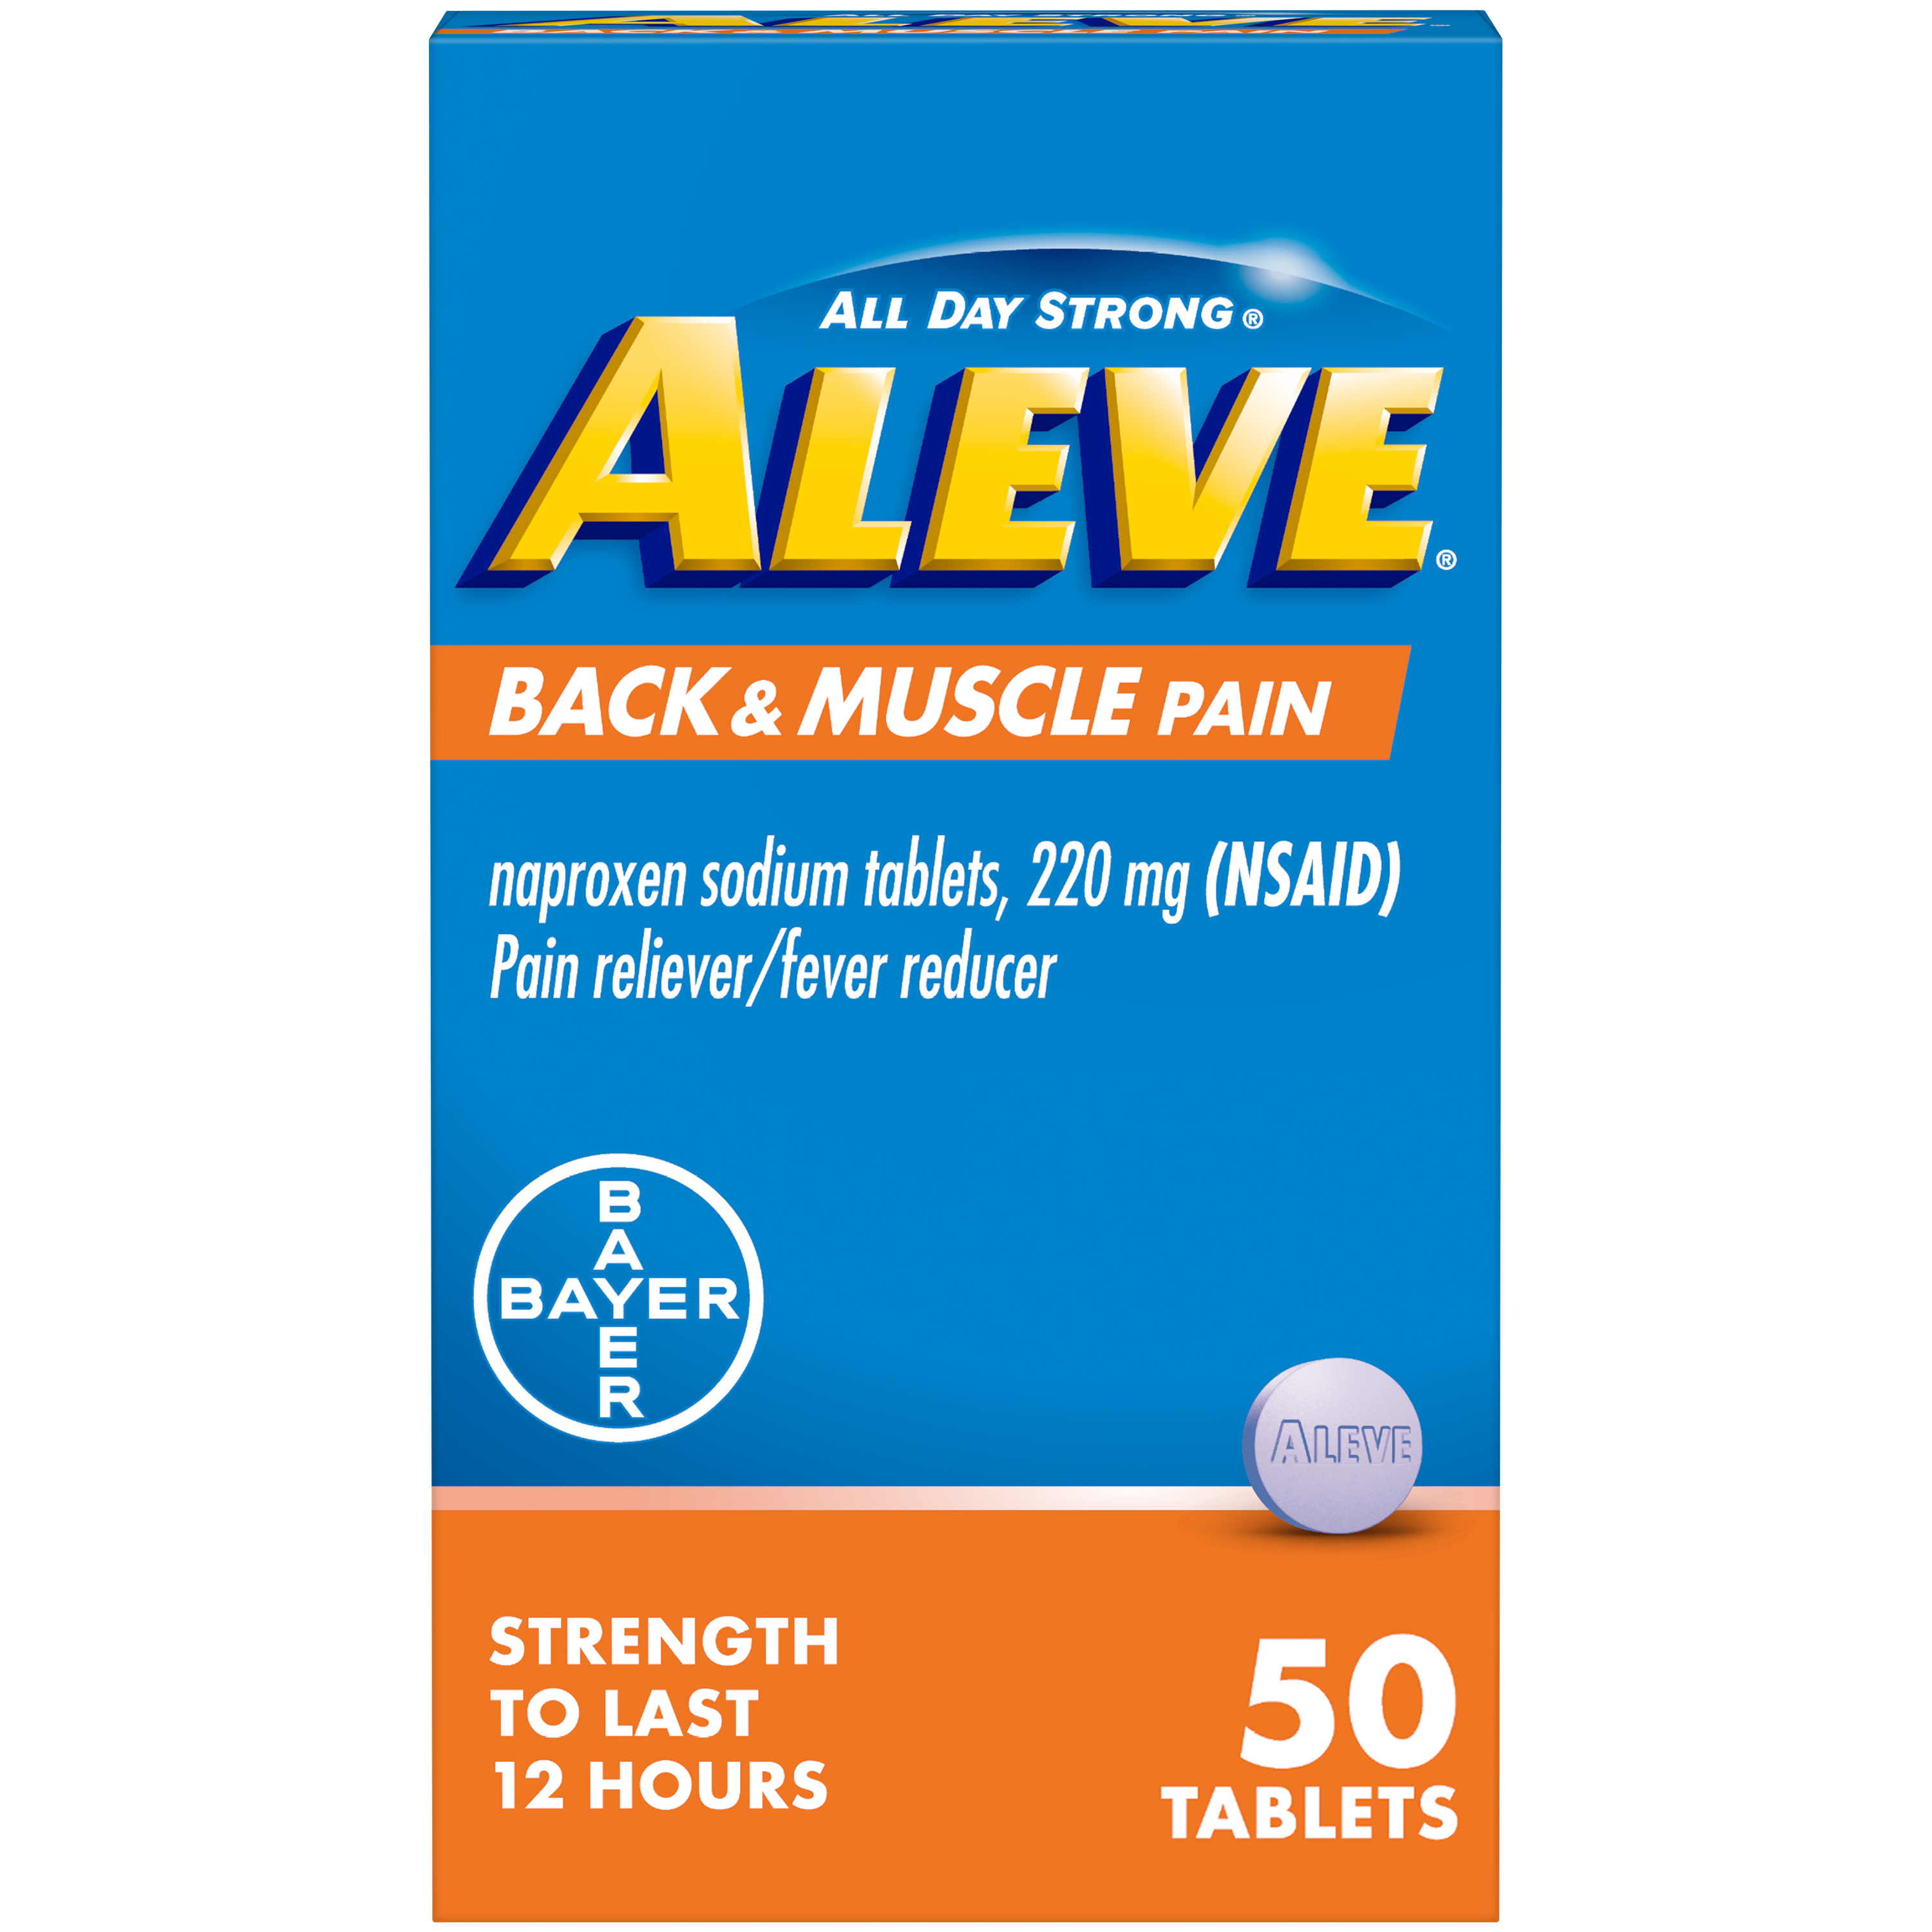 Aleve Back & Muscle Pain Reliever Naproxen Sodium Tablets, 50 Count - image 3 of 17